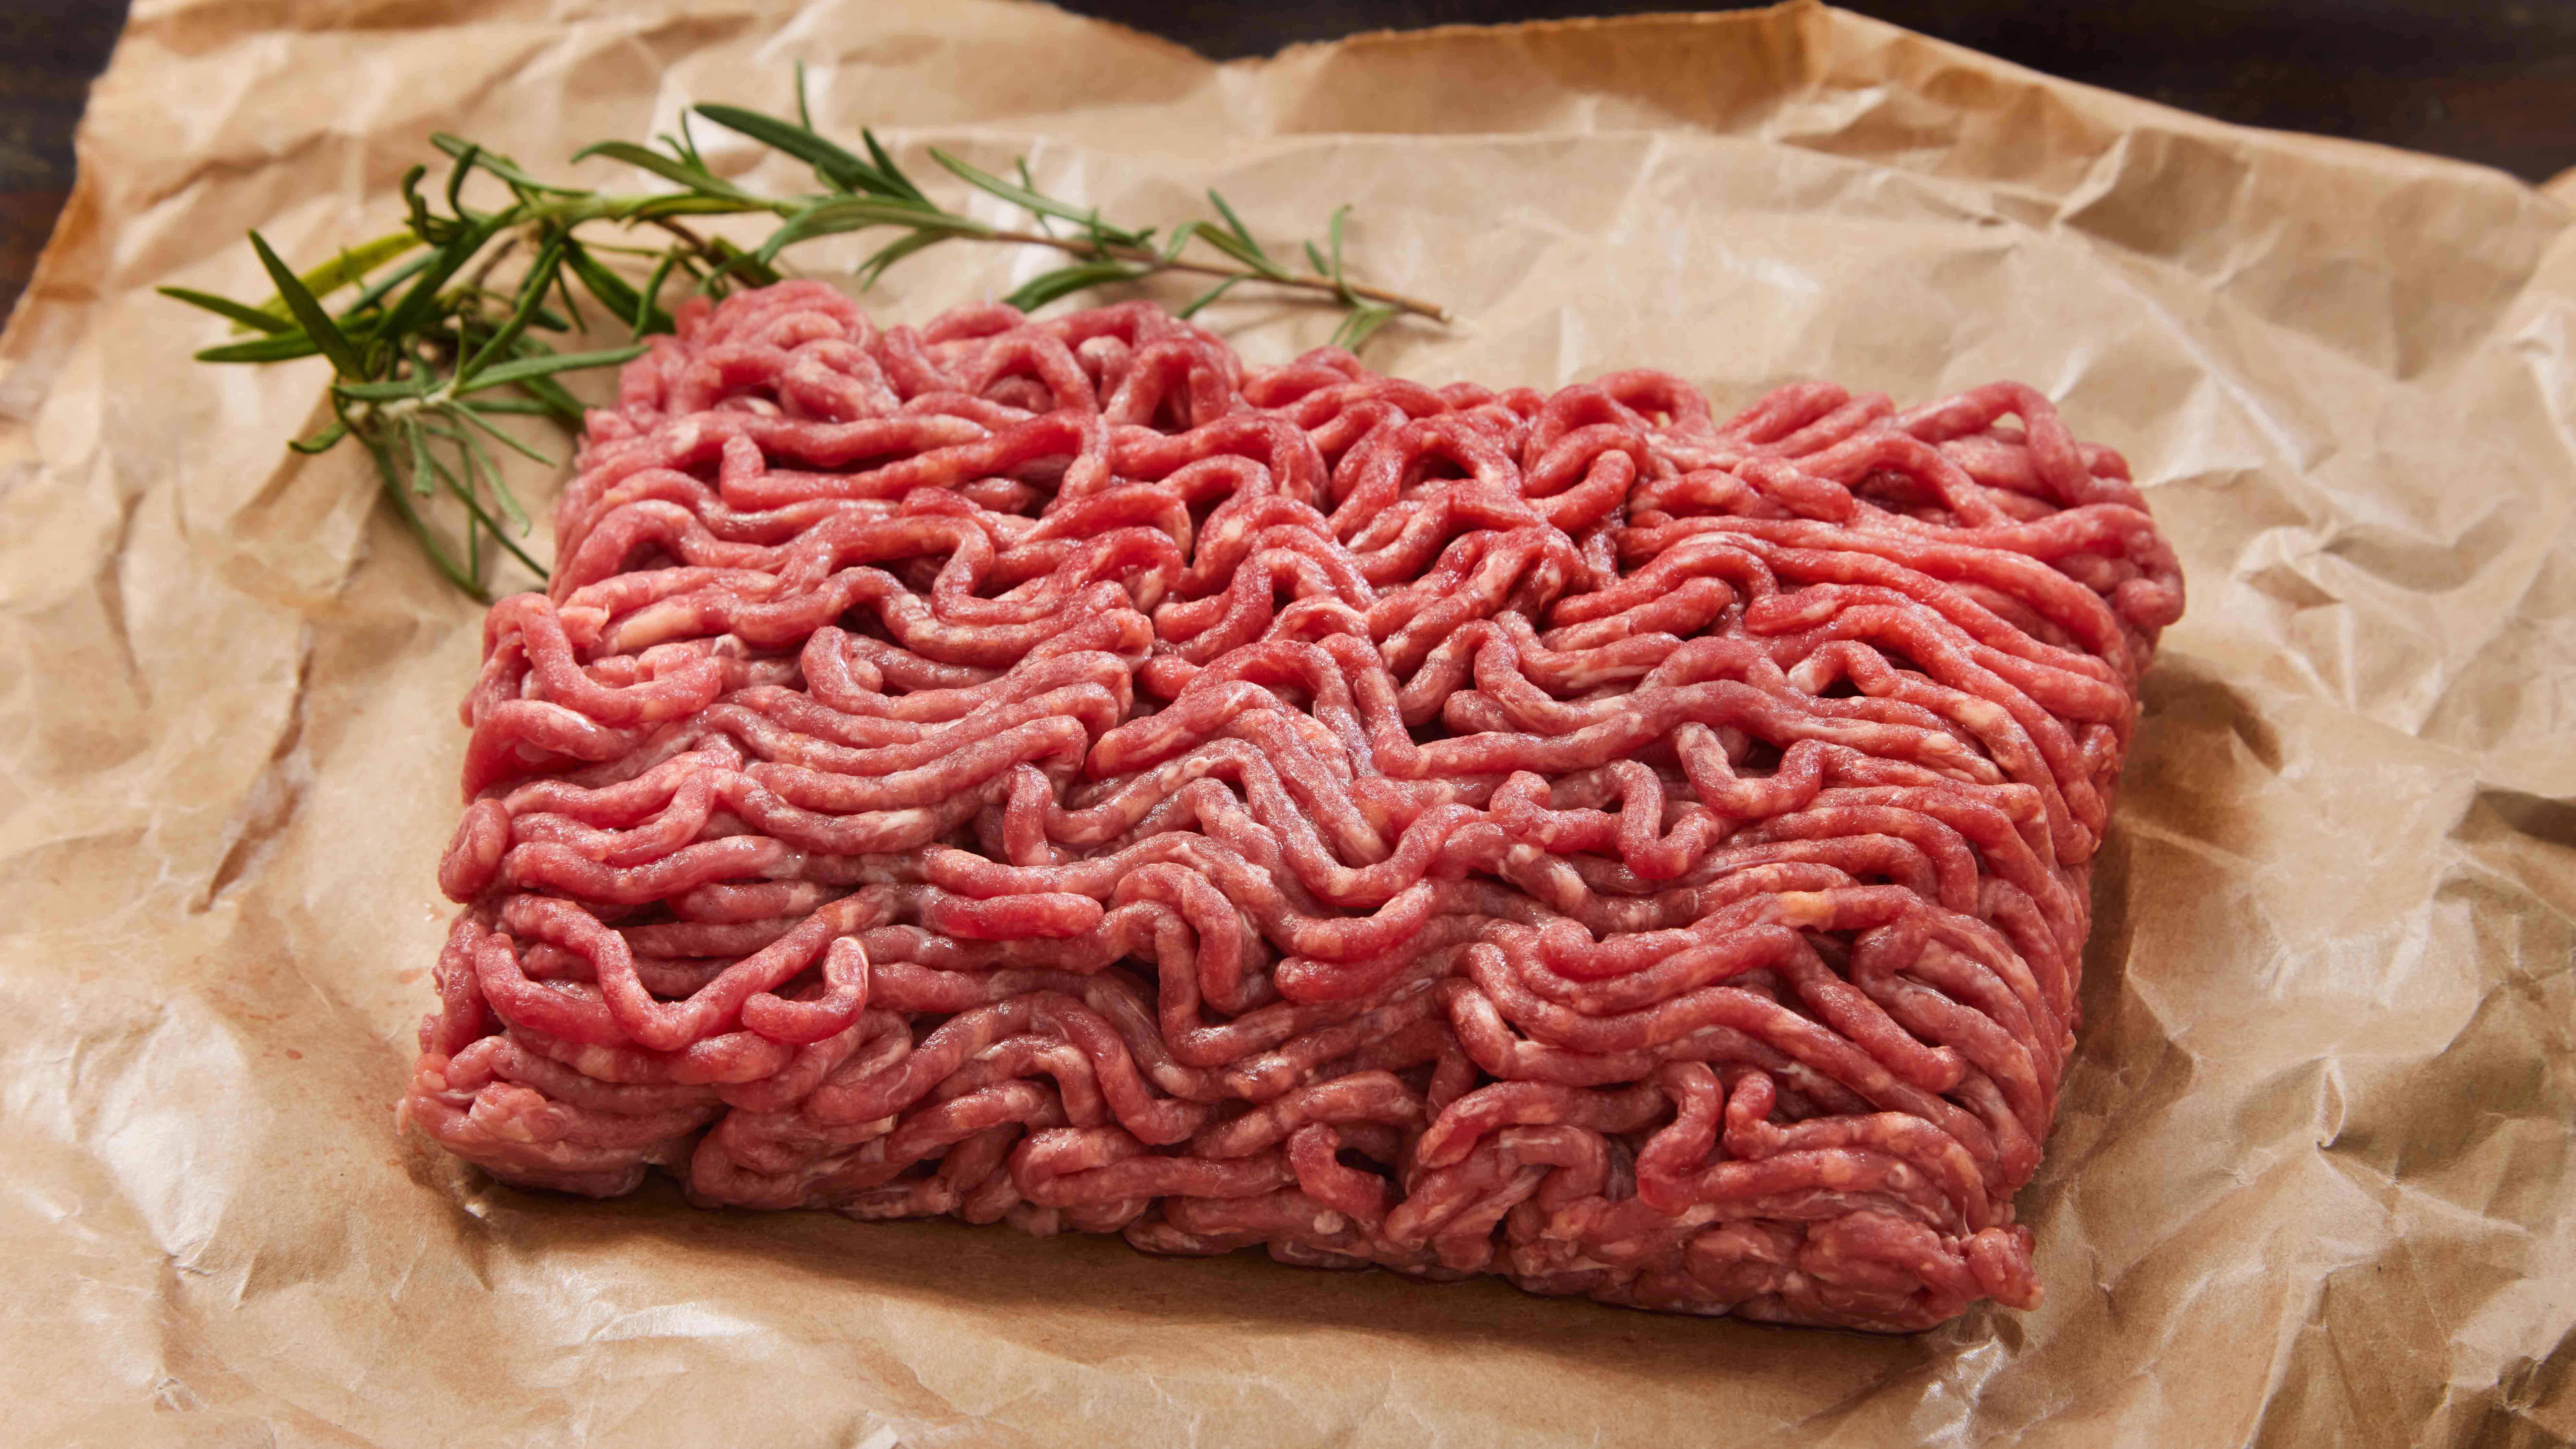 More than 58,000 pounds of ground beef recalled over possible E